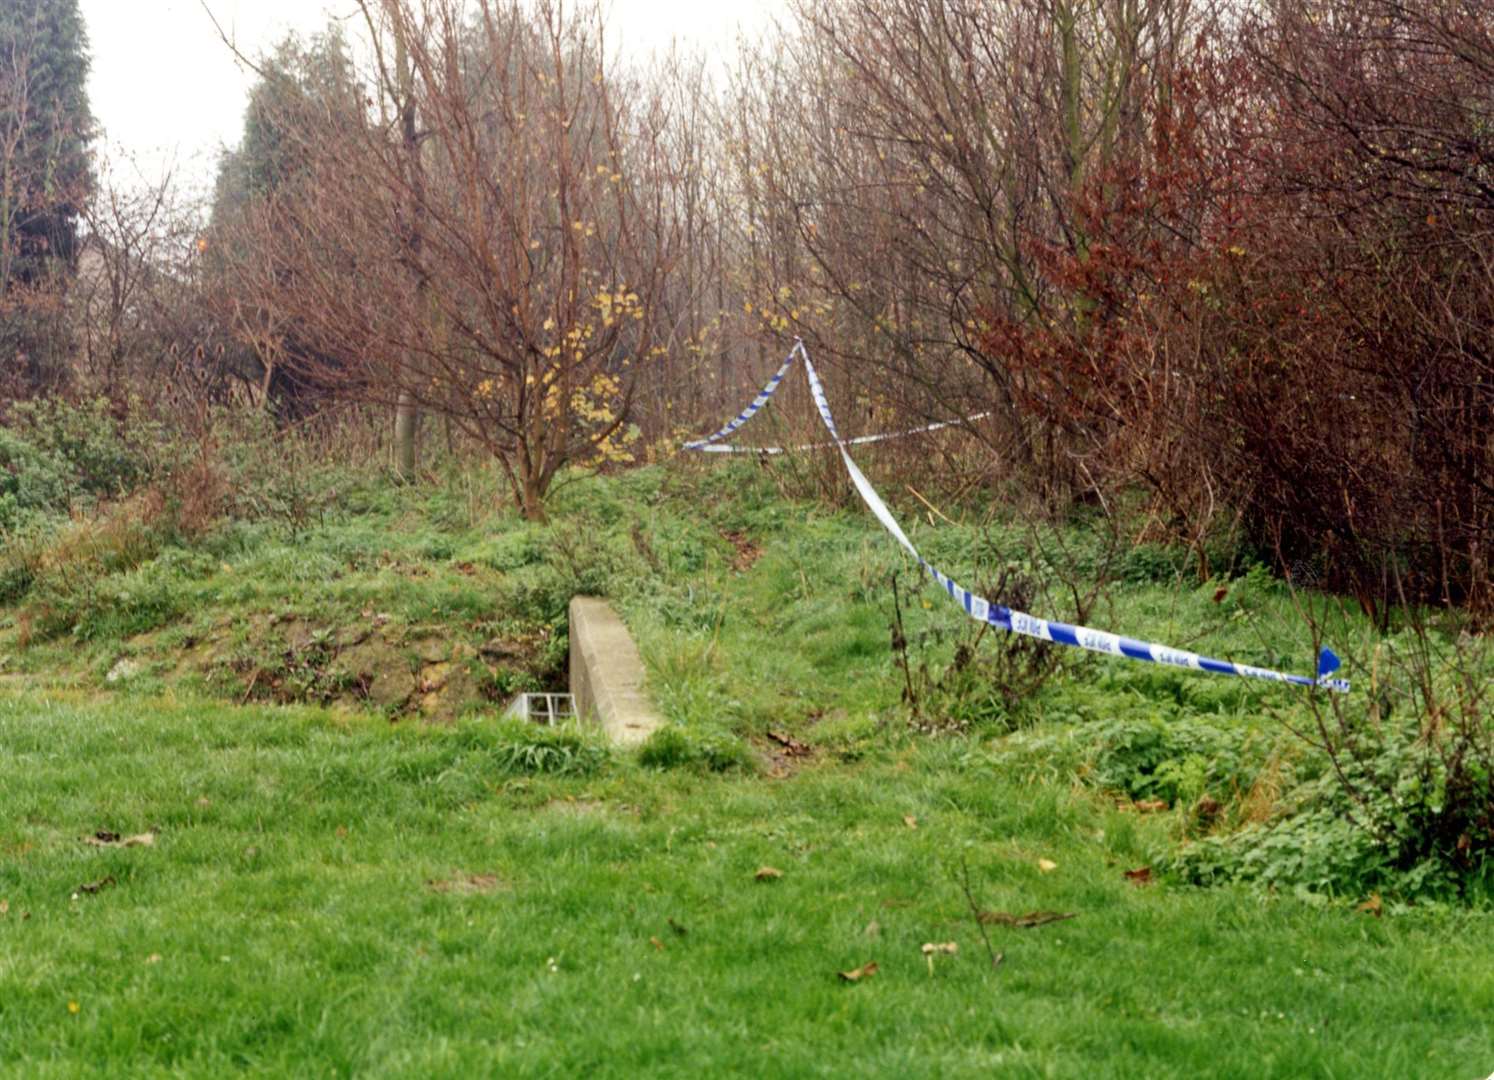 Police tape cordoning off the woods next to the Welland Estate in Peterborough, near to where Rikki Neave’s body was found (Cambs Police/PA)